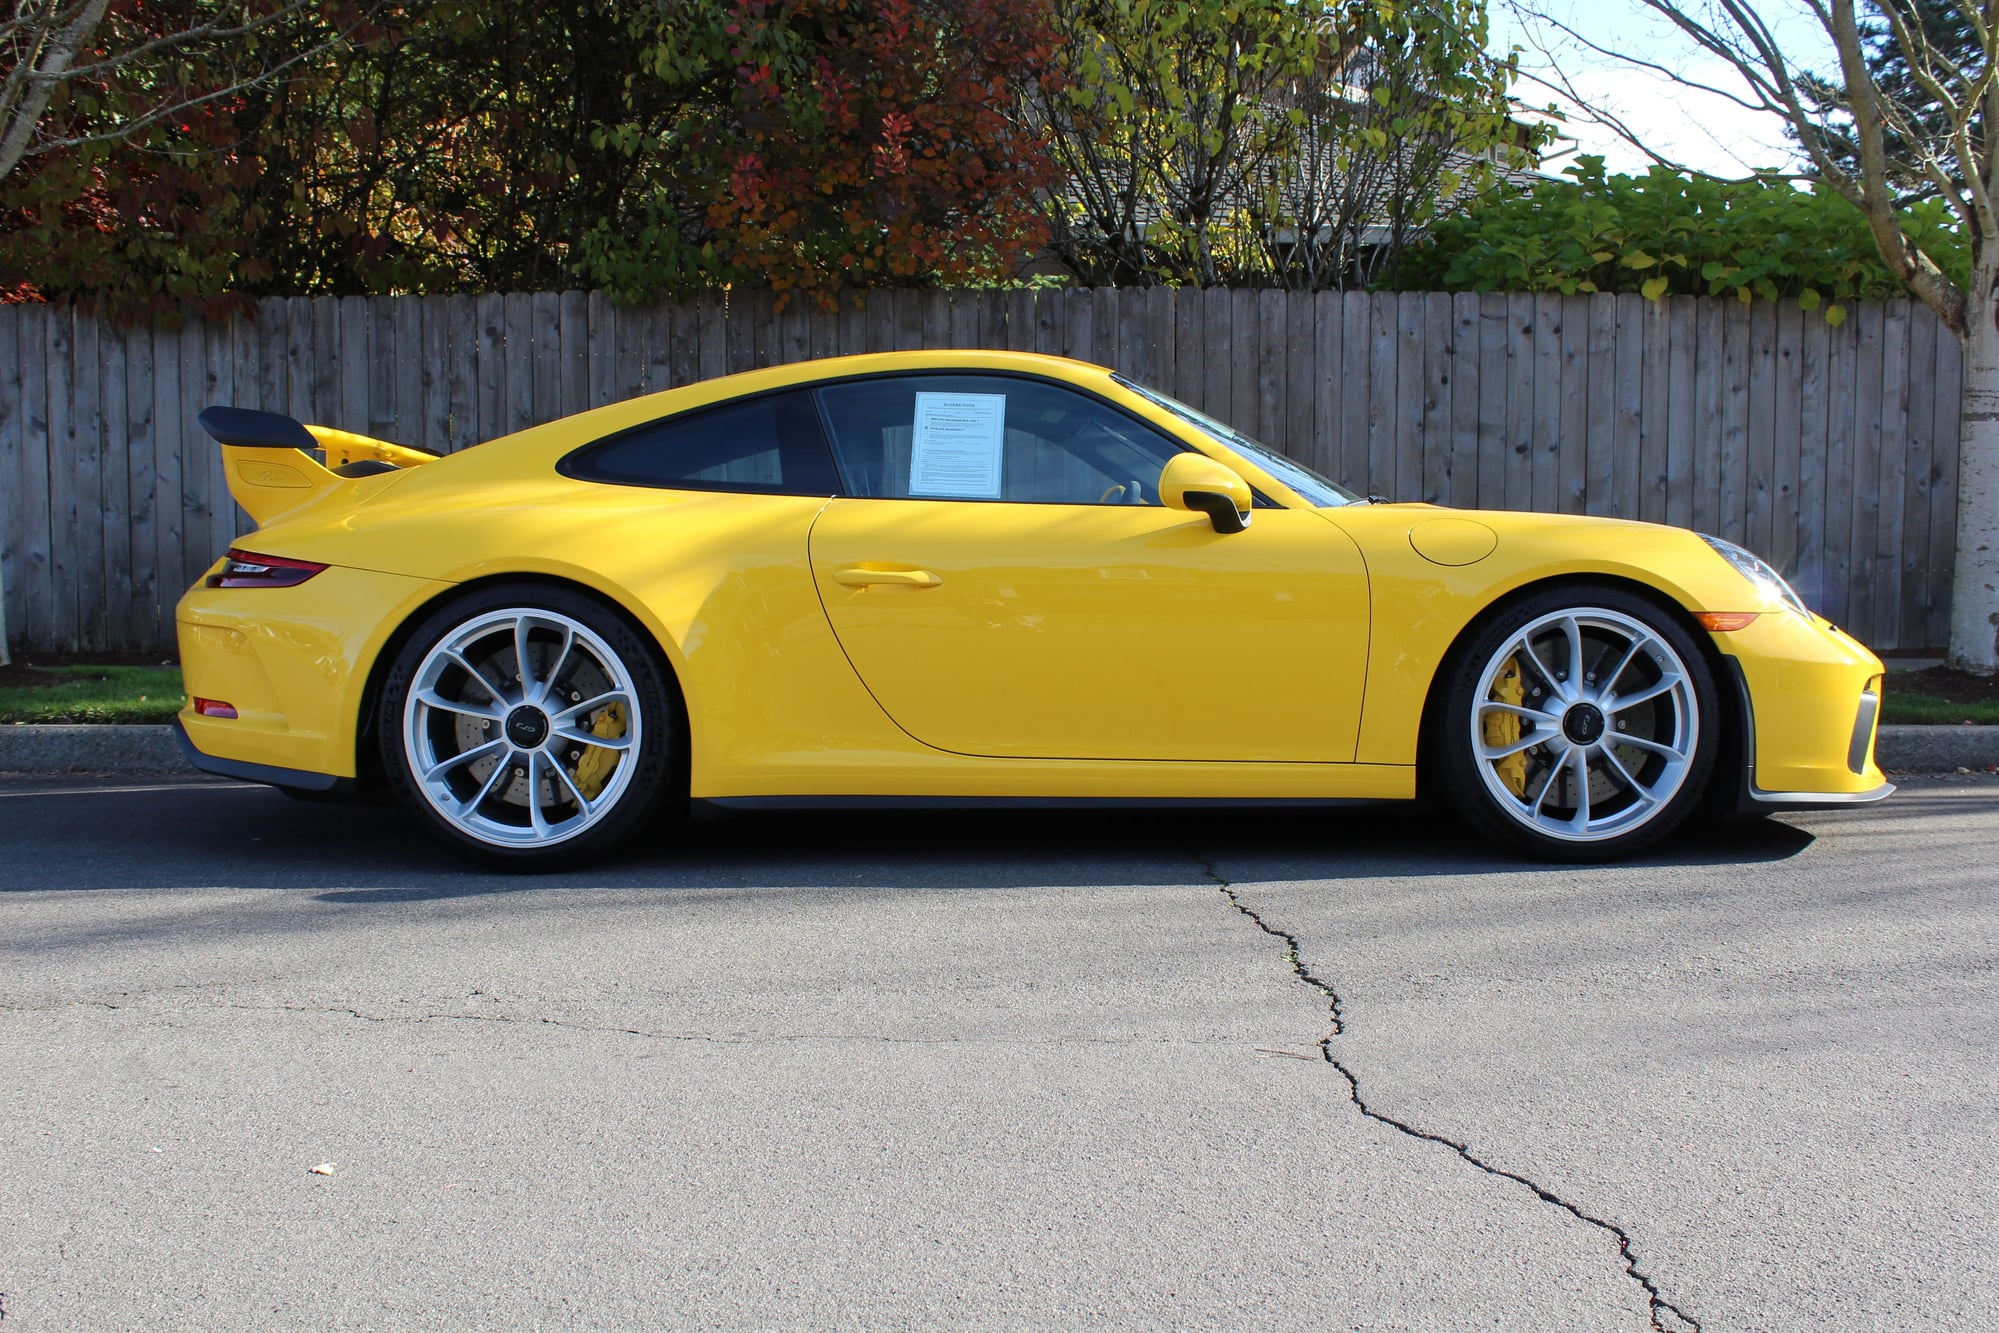 2018 Porsche GT3 - RARE one off Summer Yellow 2018 GT3 Available NOW!! - Used - VIN WP0AC2A98JS175218 - 62 Miles - 6 cyl - 2WD - Manual - Coupe - Yellow - Brownsburg, IN 46112, United States